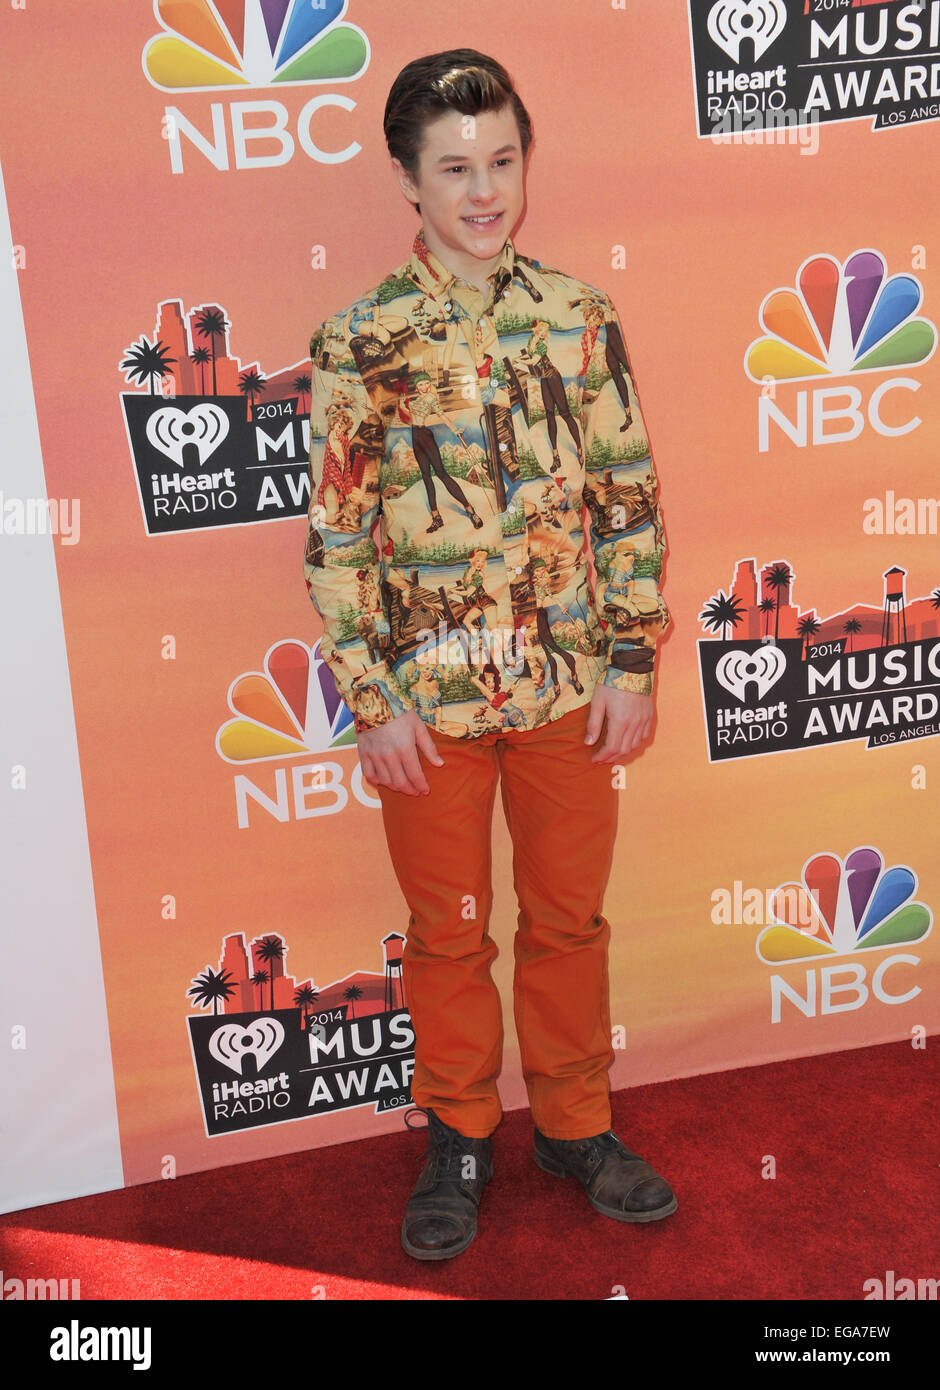 LOS ANGELES, CA - MAY 1, 2014: Nolan Gould at the 2014 iHeartRadio Music Awards at the Shrine Auditorium, Los Angeles. Stock Photo